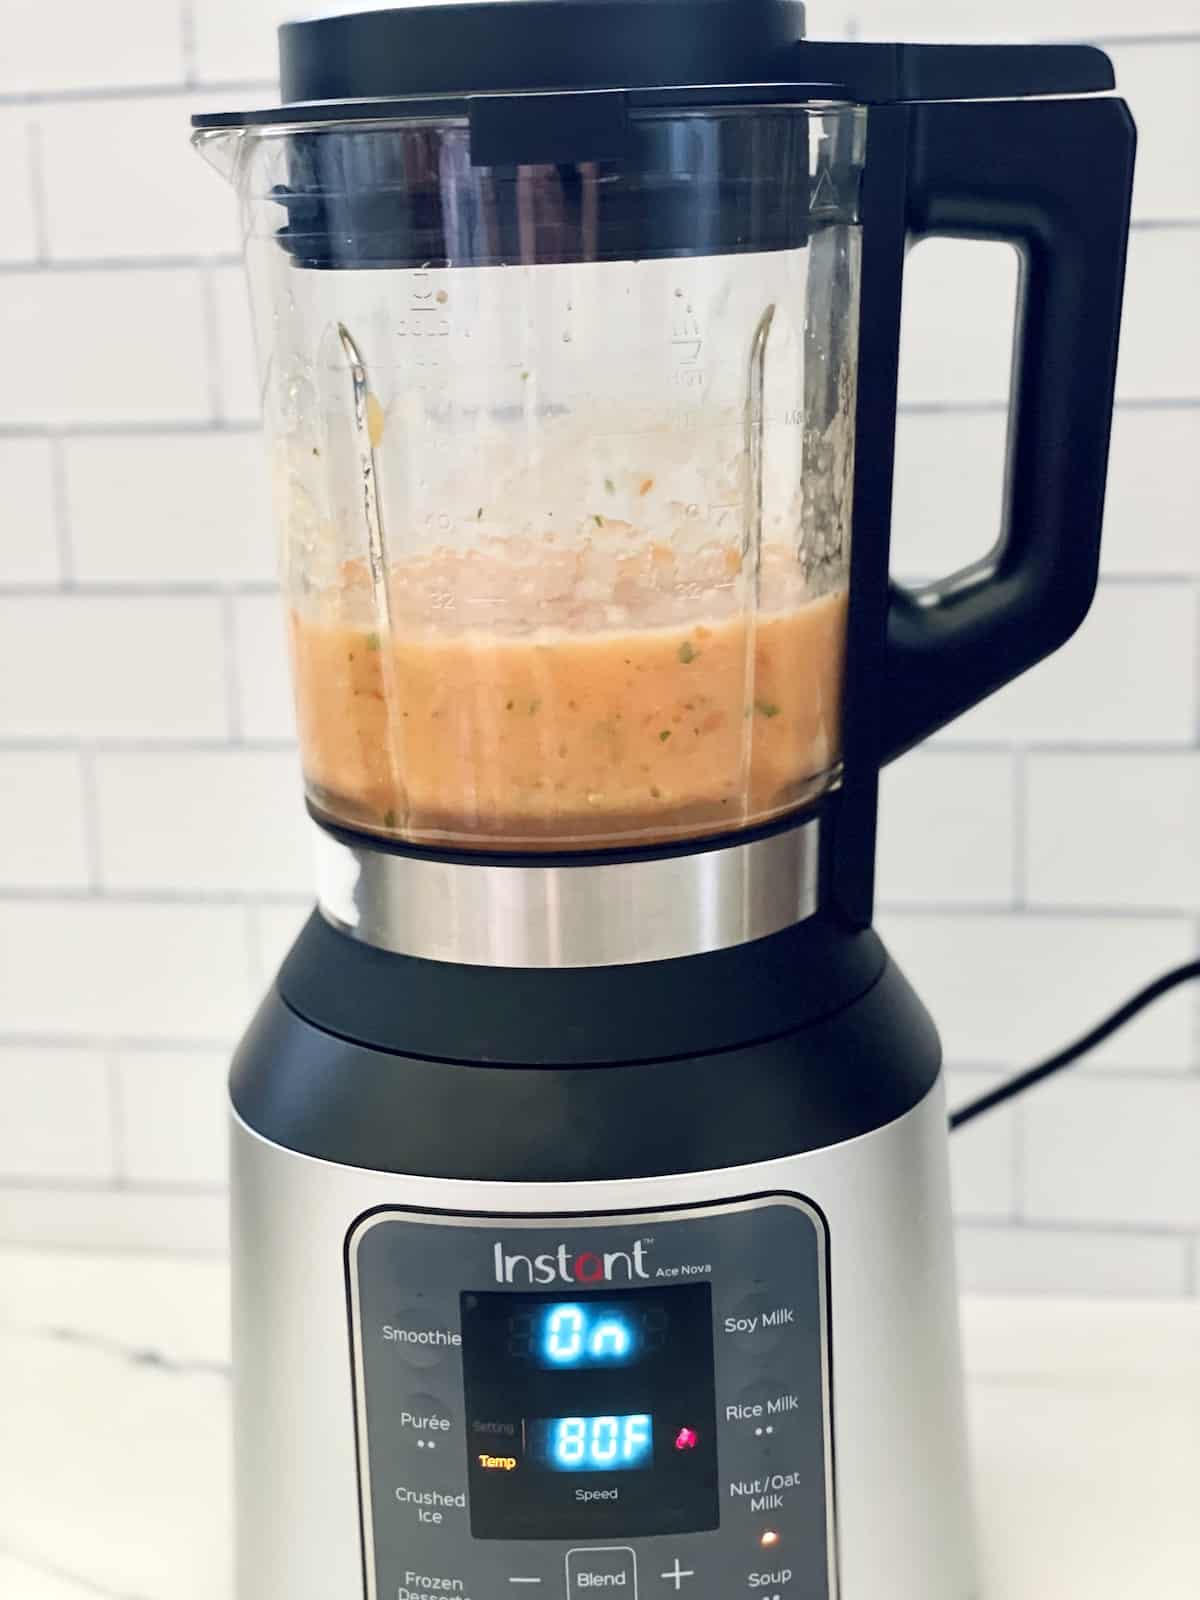 blended and cooked mango, tomato, habanero, onion, garlic in an Instant Pot cooking blender